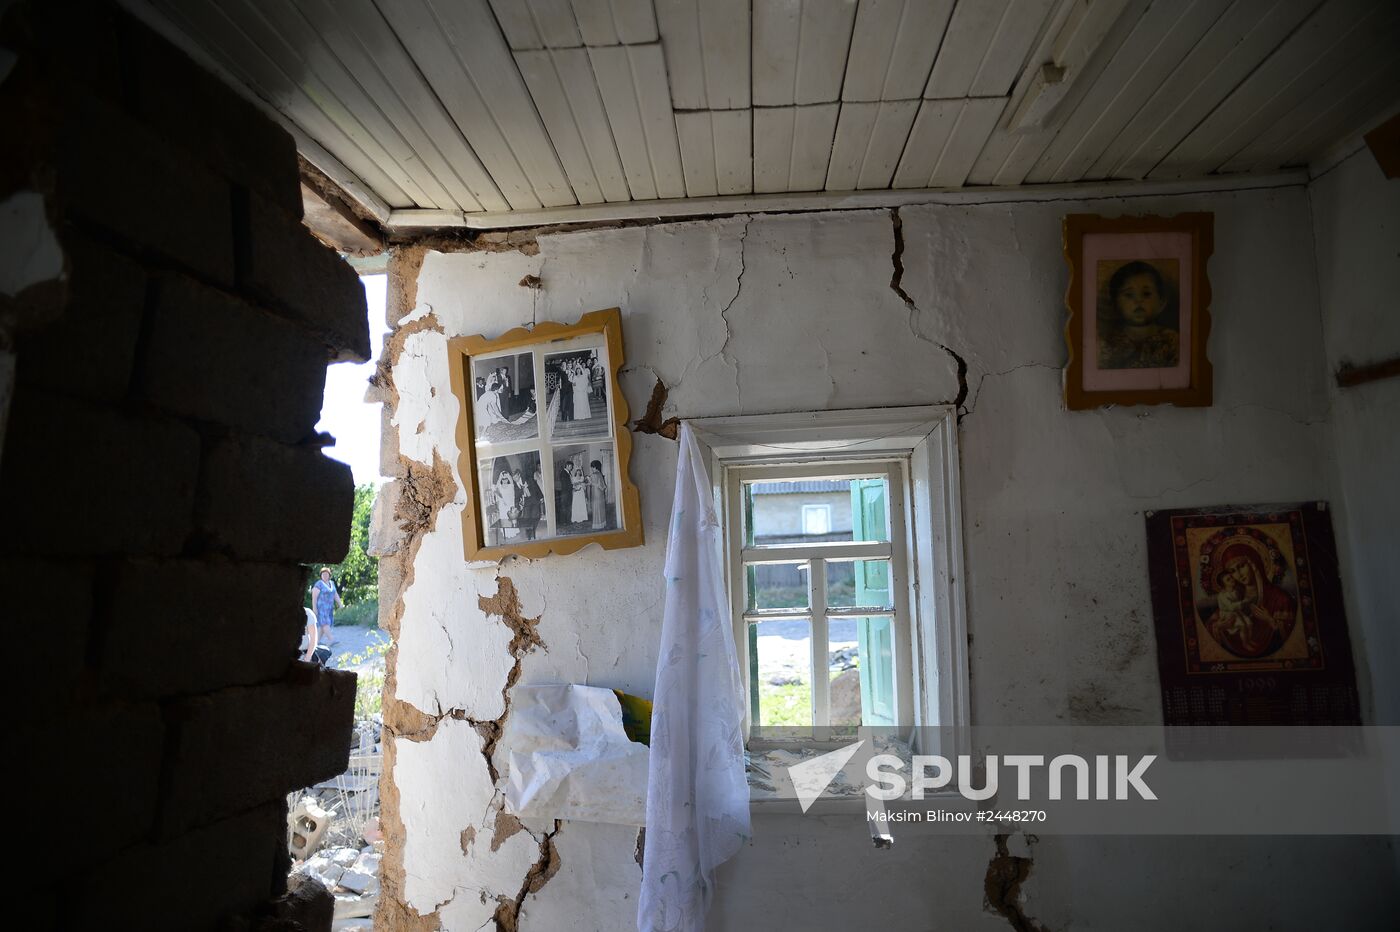 Aftermath of shelling in the town of Amvrosiyevka, Donetsk region